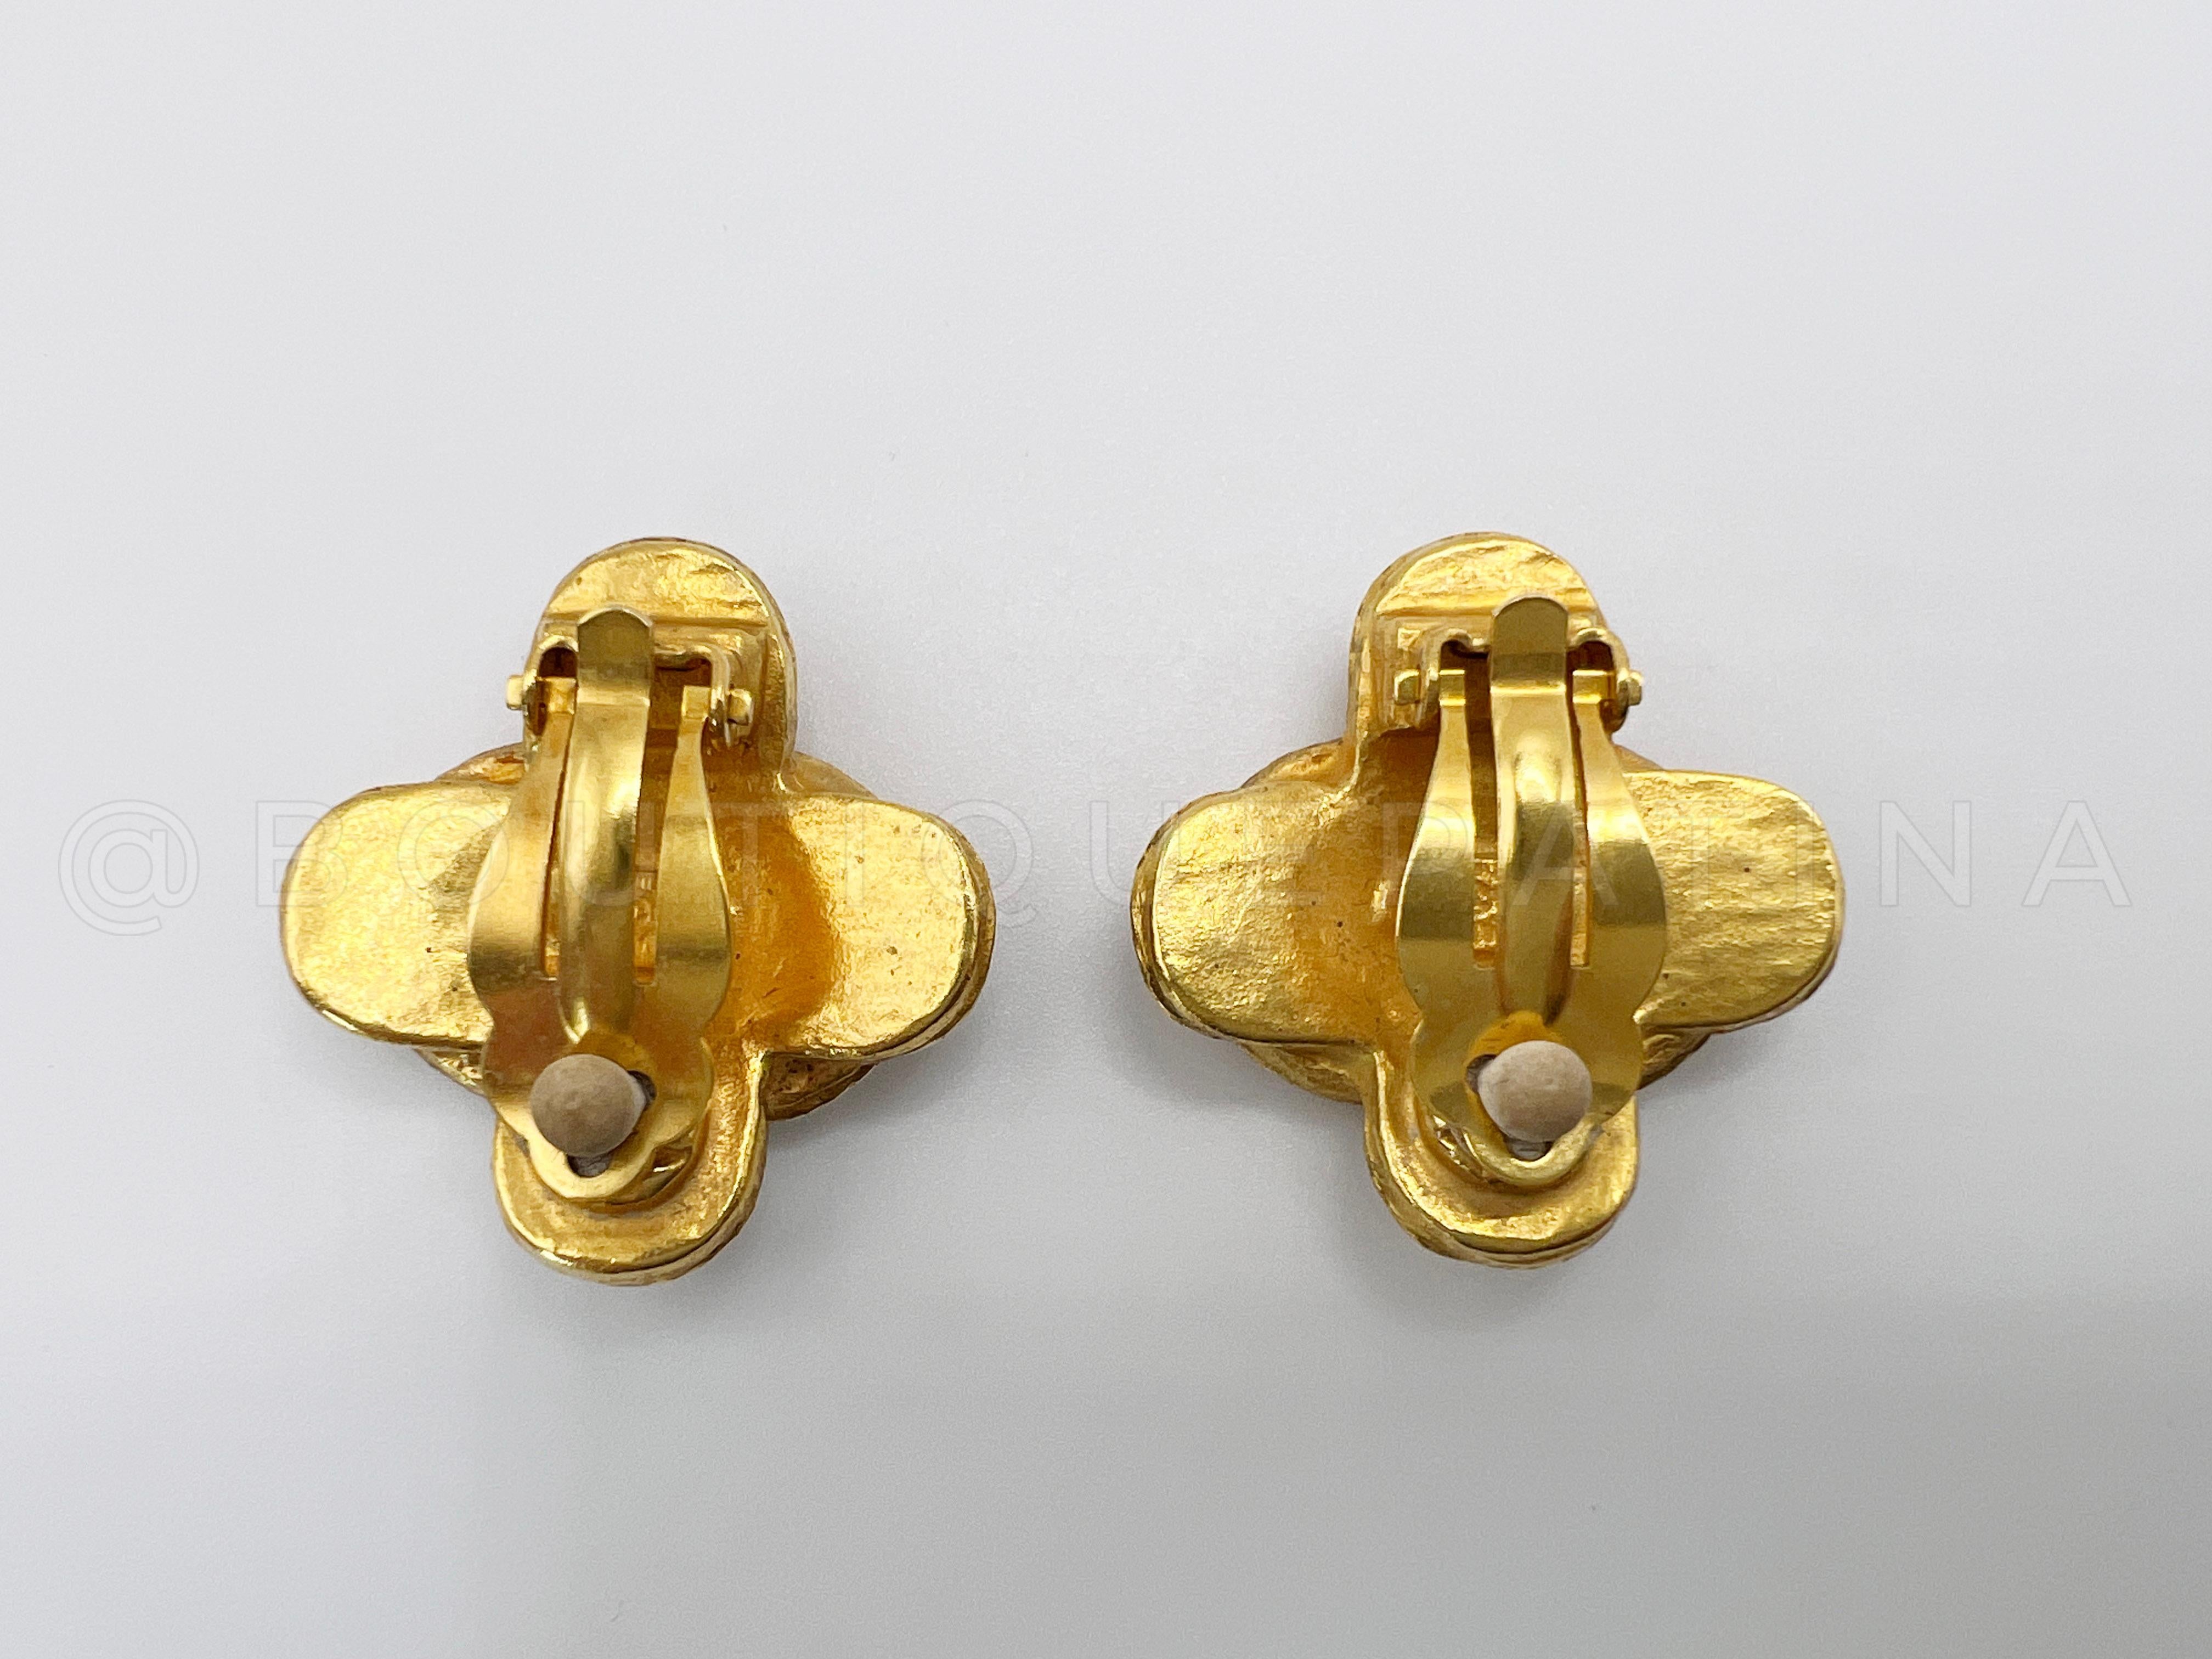 Store item: 66231
Chanel 94A Clover Stud Earrings Baroque Gold Plated

Clip ons 24k gold plated

Condition: Excellent
For 19 years, Boutique Patina has specialized in sourcing and curating the best condition vintage leather treasures by searching